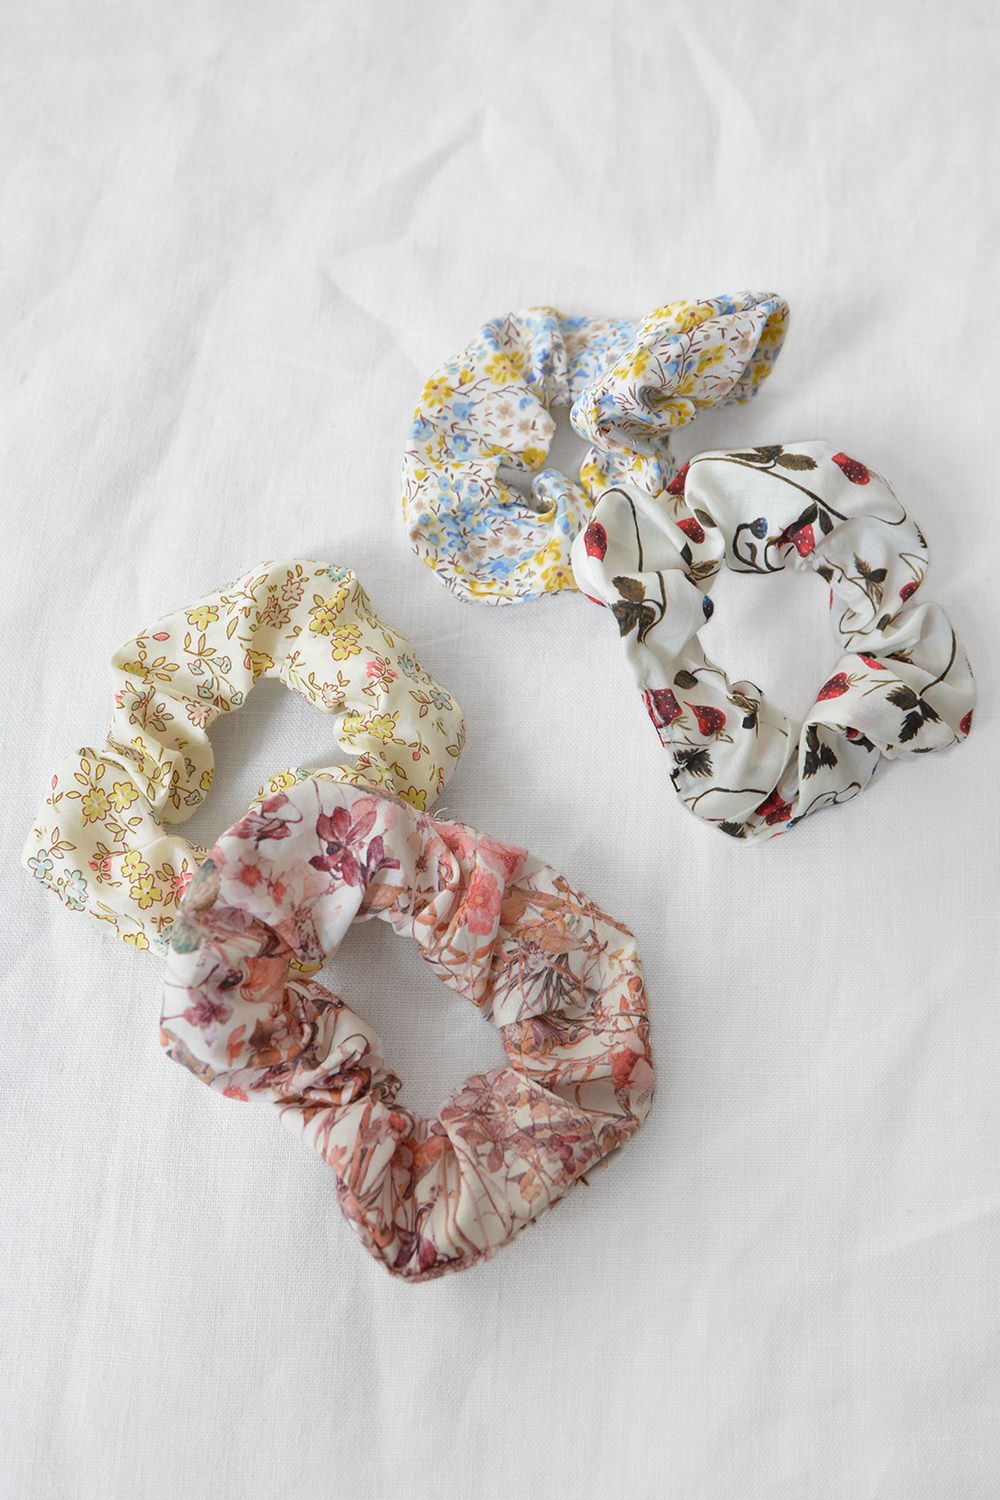 MAKIE Handmade Scrunchies Liberty Fabric Top Picture